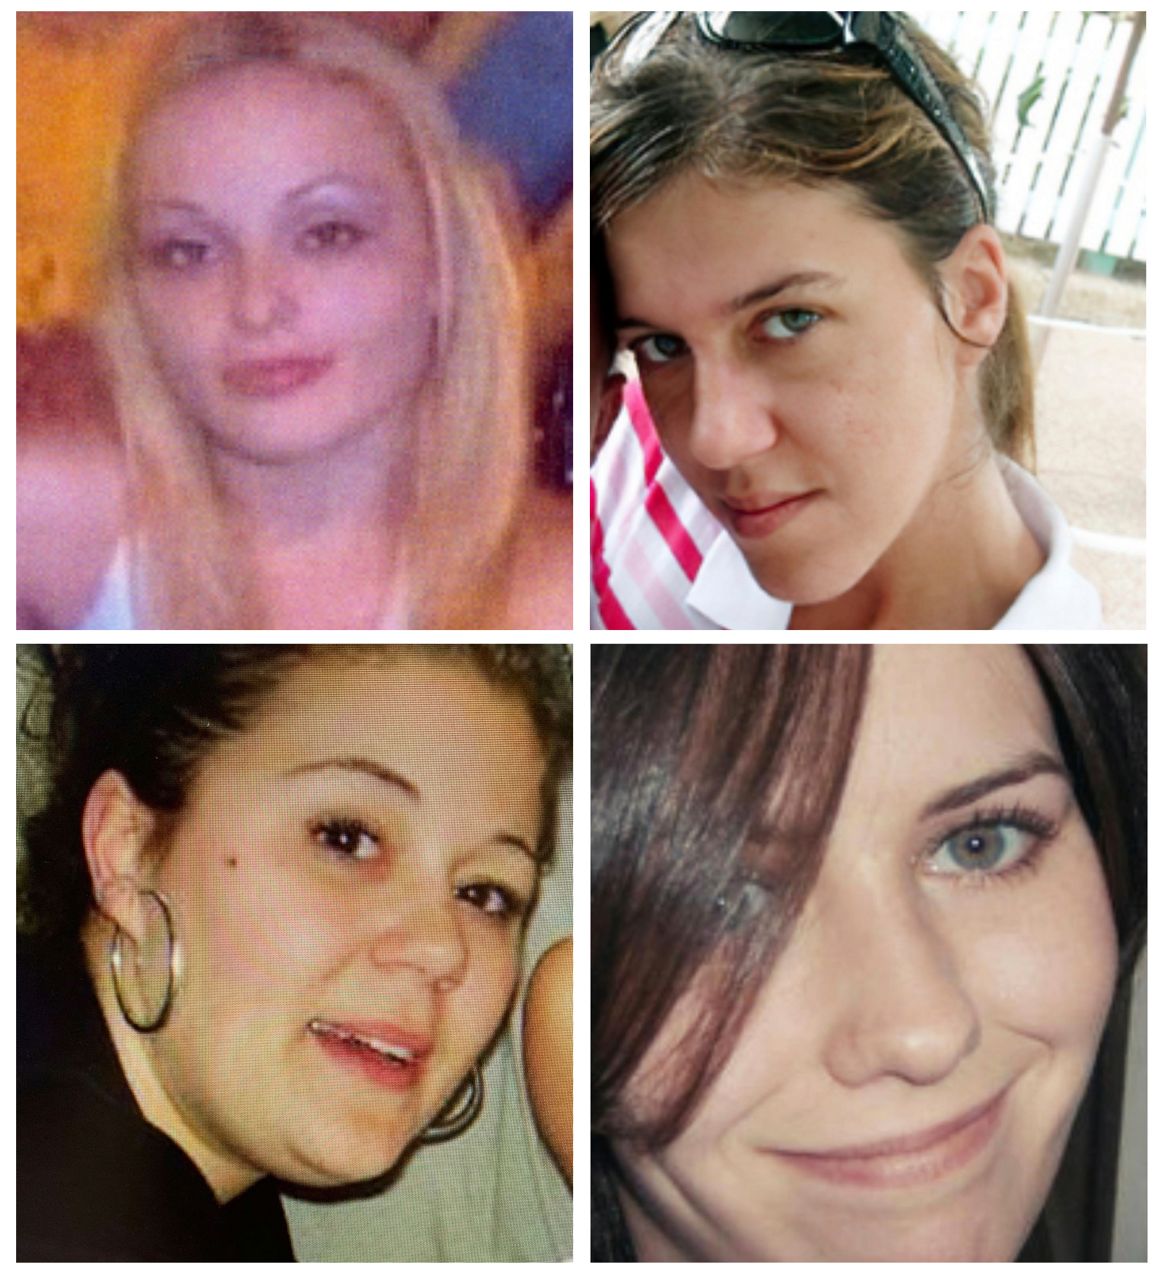 This combination of undated image provided by the Suffolk County Police Department, shows Melissa Barthelemy, top left, Amber Costello, top right, Megan Waterman, bottom left, and Maureen Brainard-Barnes. Authorities on Long Island are vowing to continue investigating a string of killings known as the Gilgo Beach murders after charging an architect in the deaths of three of the 11 victims. Rex Heuermann, 59, is accused of killing Melissa Barthelemy, Amber Costello and Megan Waterman over a decade ago. He is also considered the prime suspect in the death of another woman, Maureen Brainard-Barnes. (Suffolk County Police Department via AP)